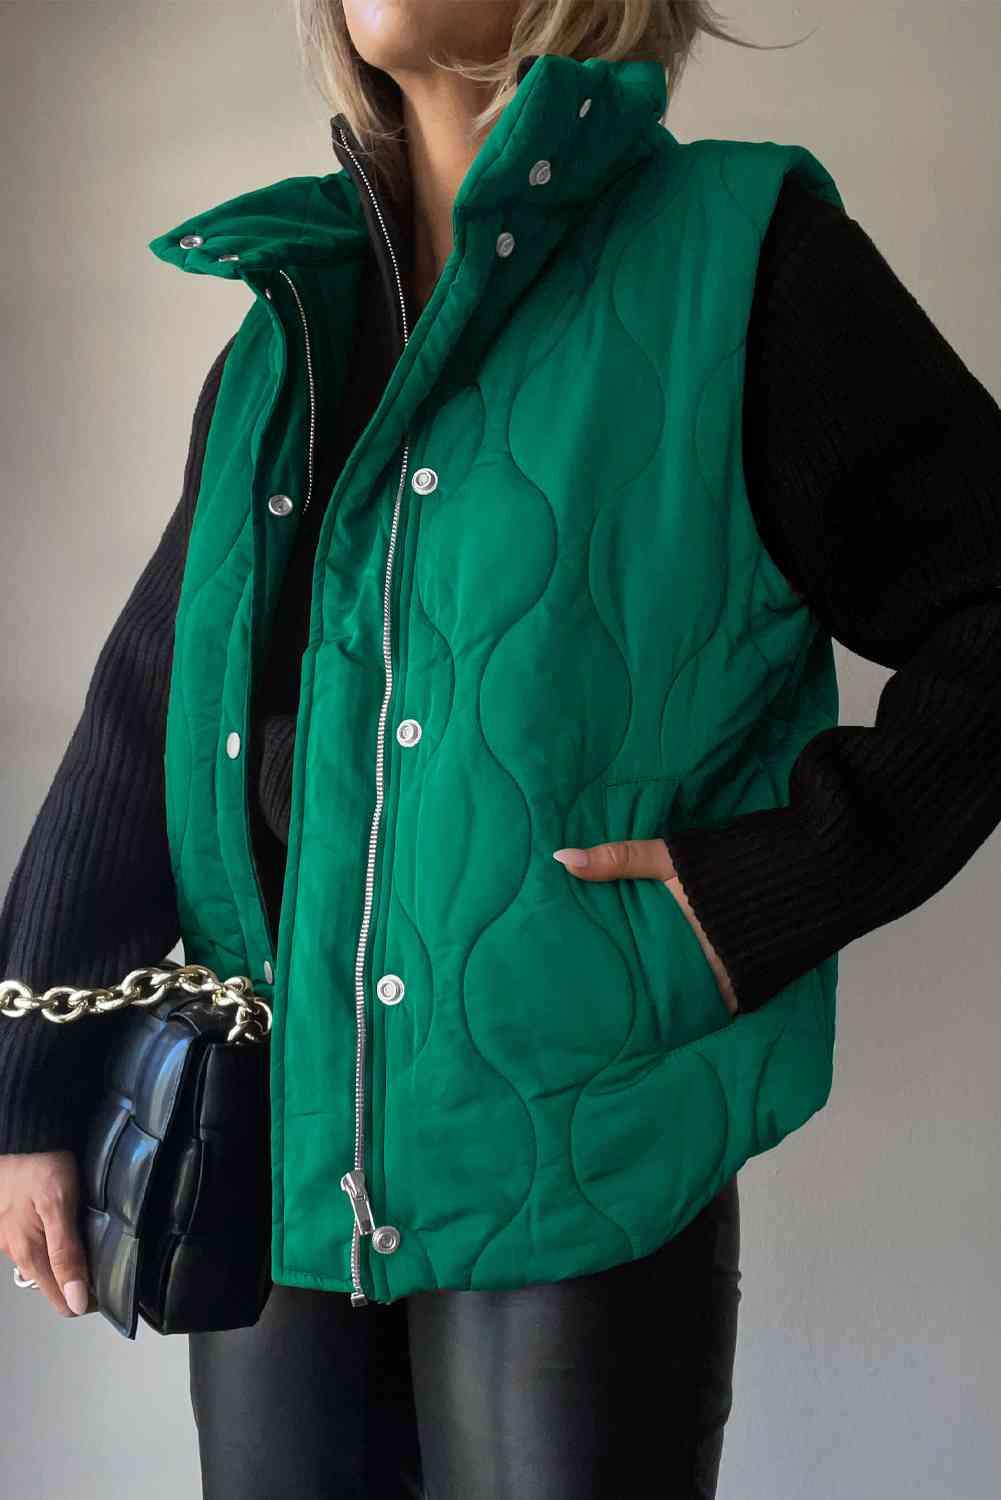 a woman in a green vest holding a black purse